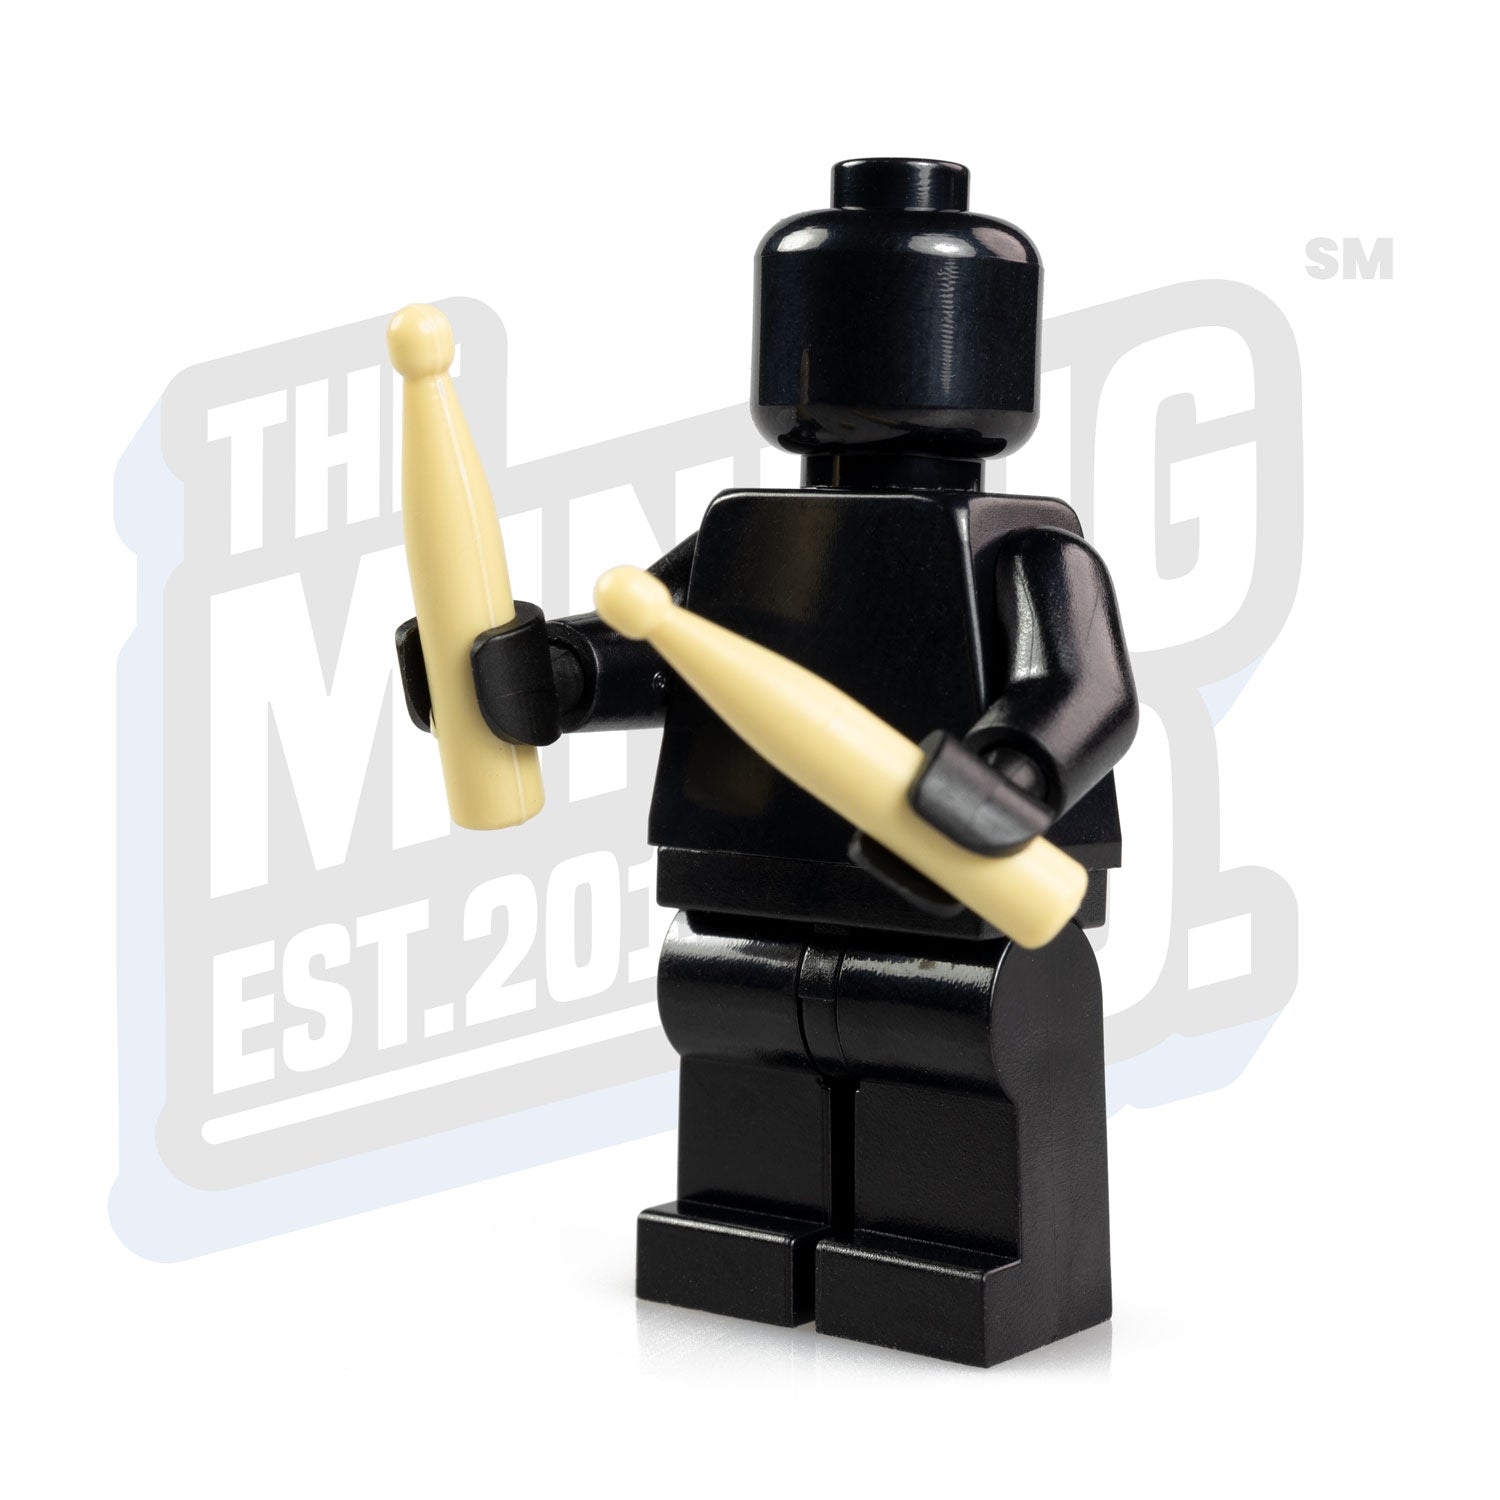 Drumsticks - The Minifig Co.